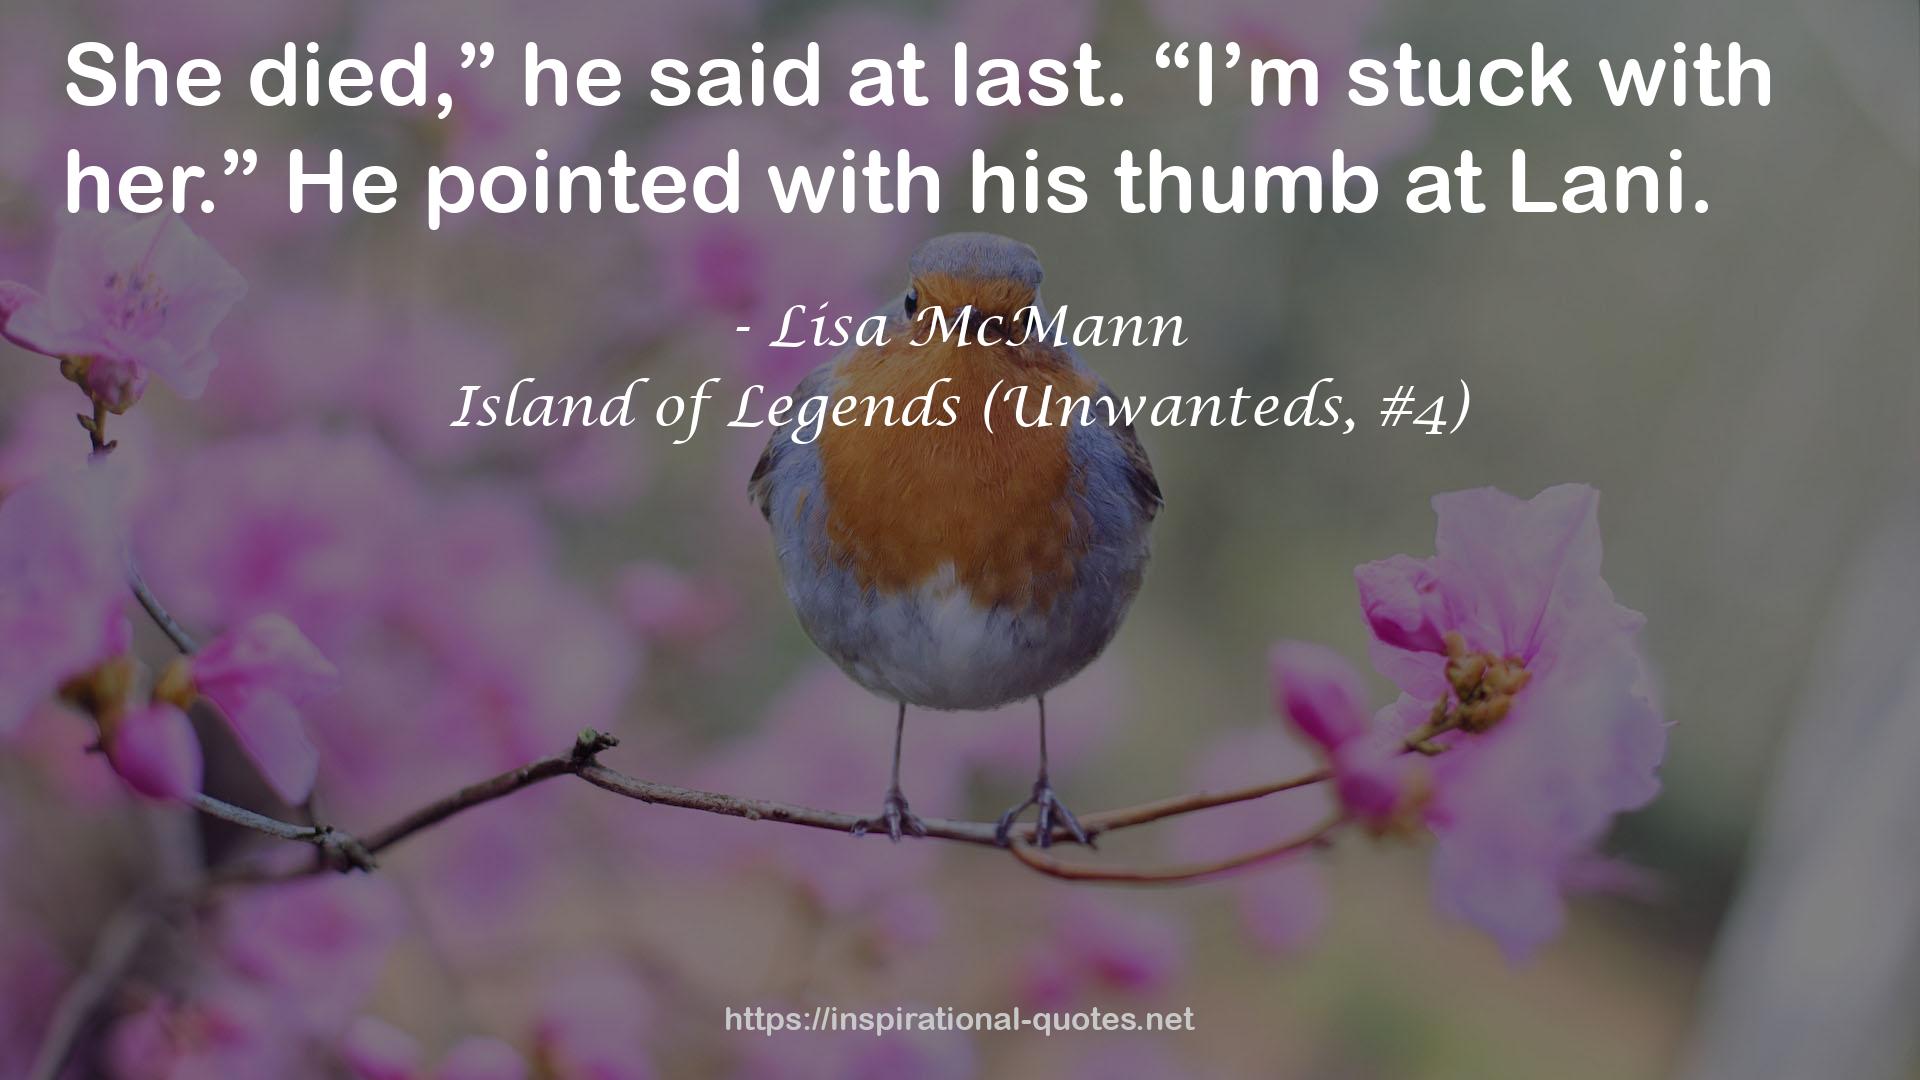 Island of Legends (Unwanteds, #4) QUOTES